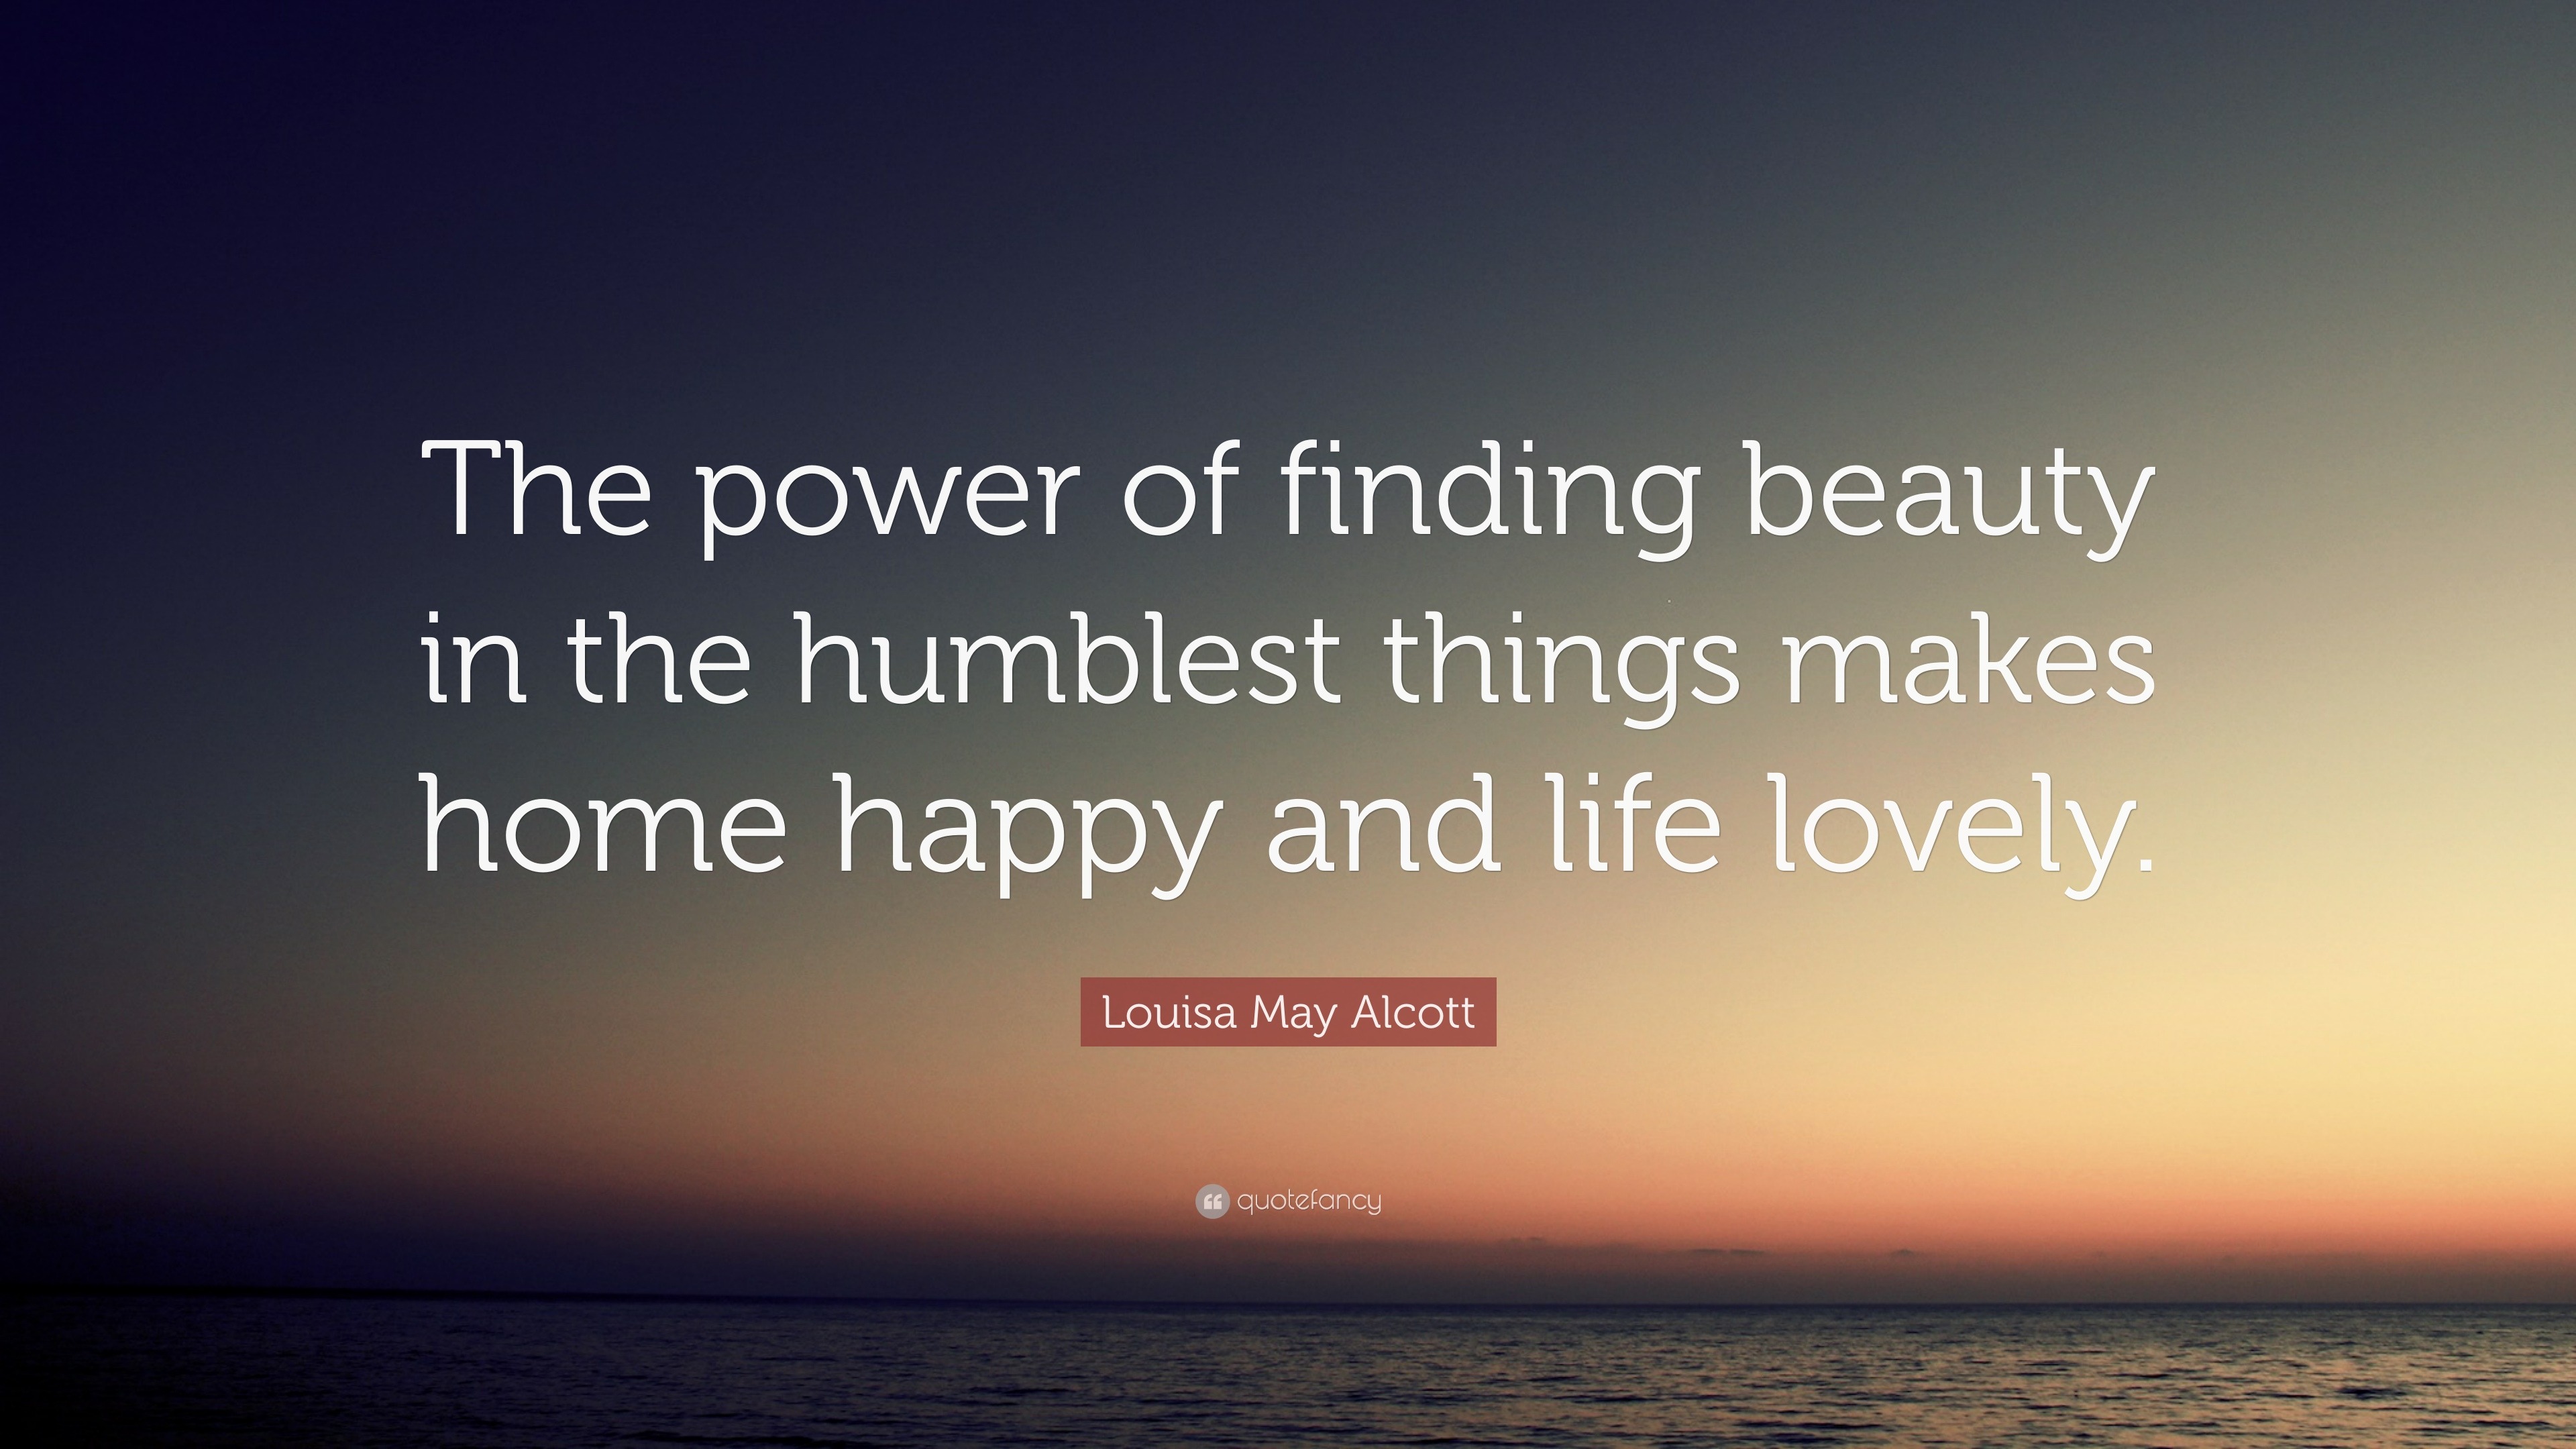 Louisa May Alcott Quote “the Power Of Finding Beauty In The Humblest